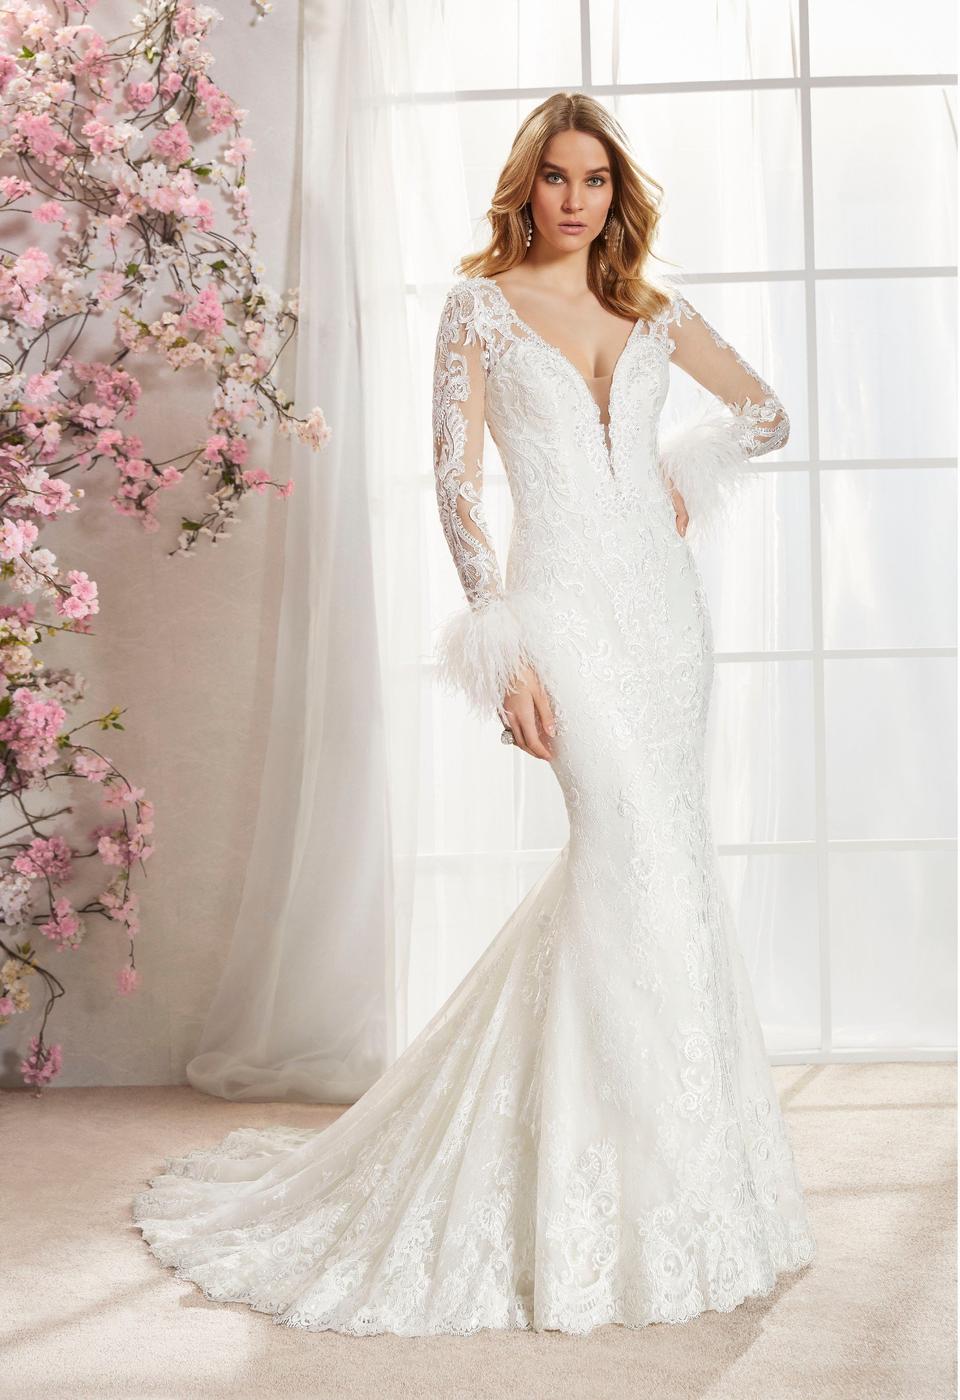 41 Best Winter Wedding Dresses 2021 - hitched.co.uk - hitched.co.uk